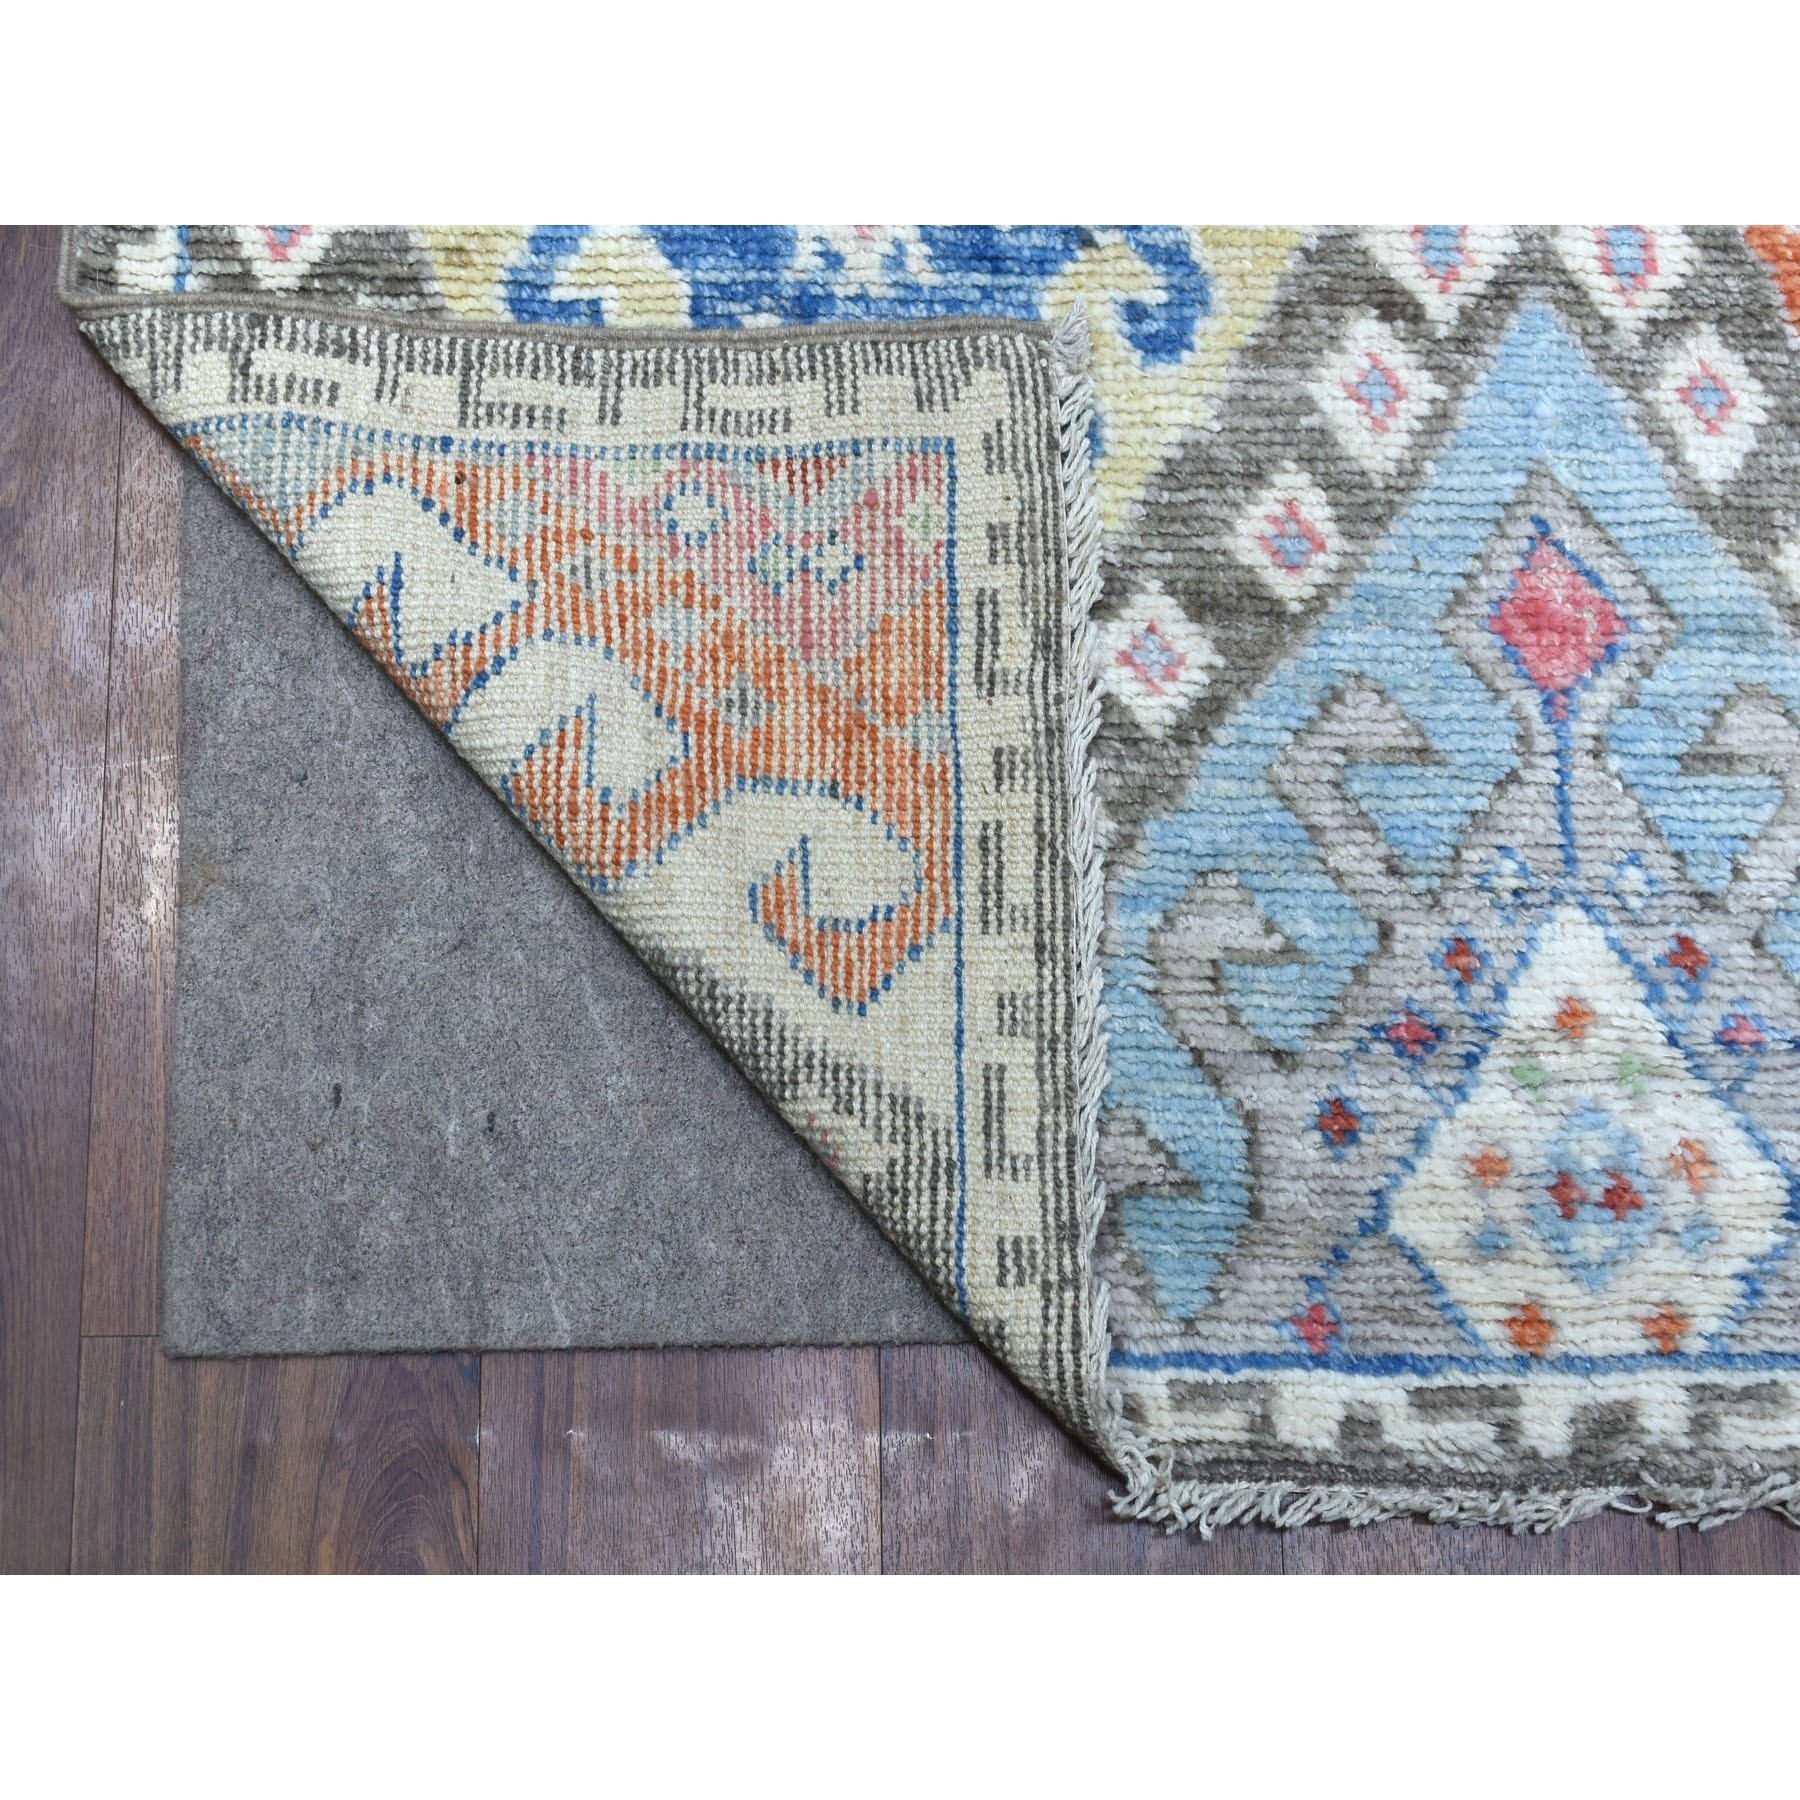 4'x11'8" Gray Extra Soft Wool Hand Woven Colorful Geometric Design Anatolian Village Inspired Oriental Runner Rug 